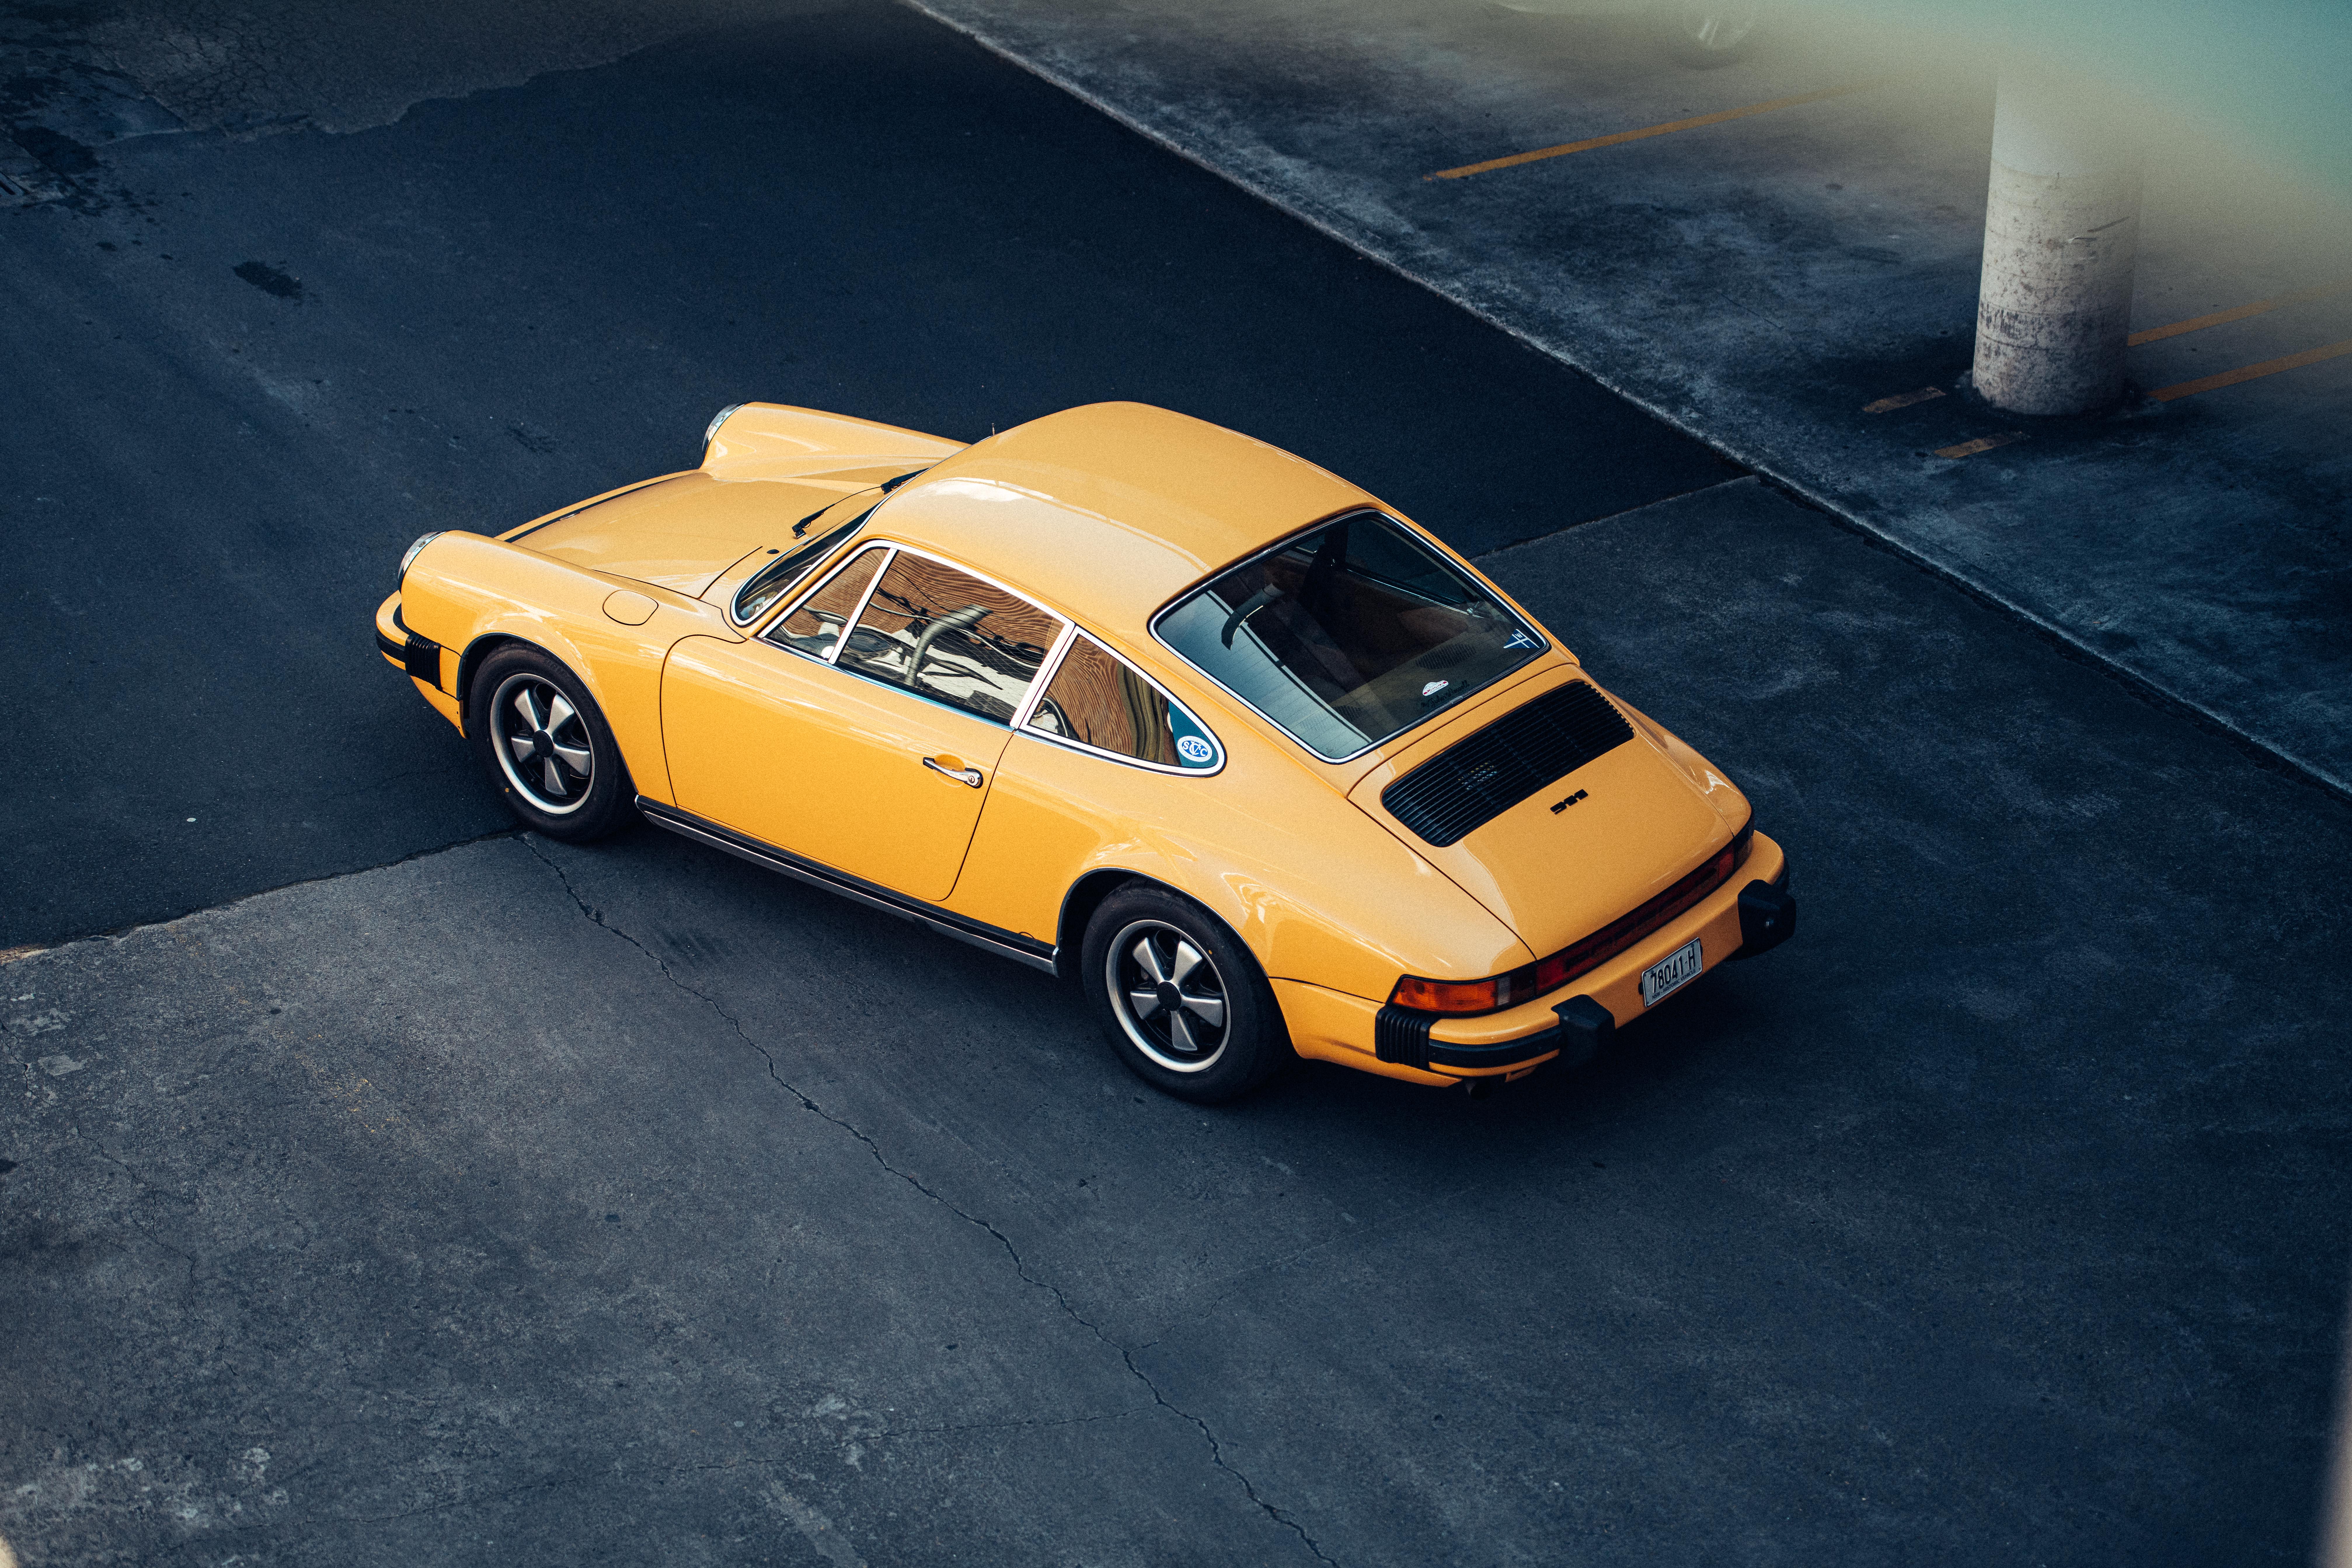 Aerial view of yellow classic Porsche 911 in parking lot